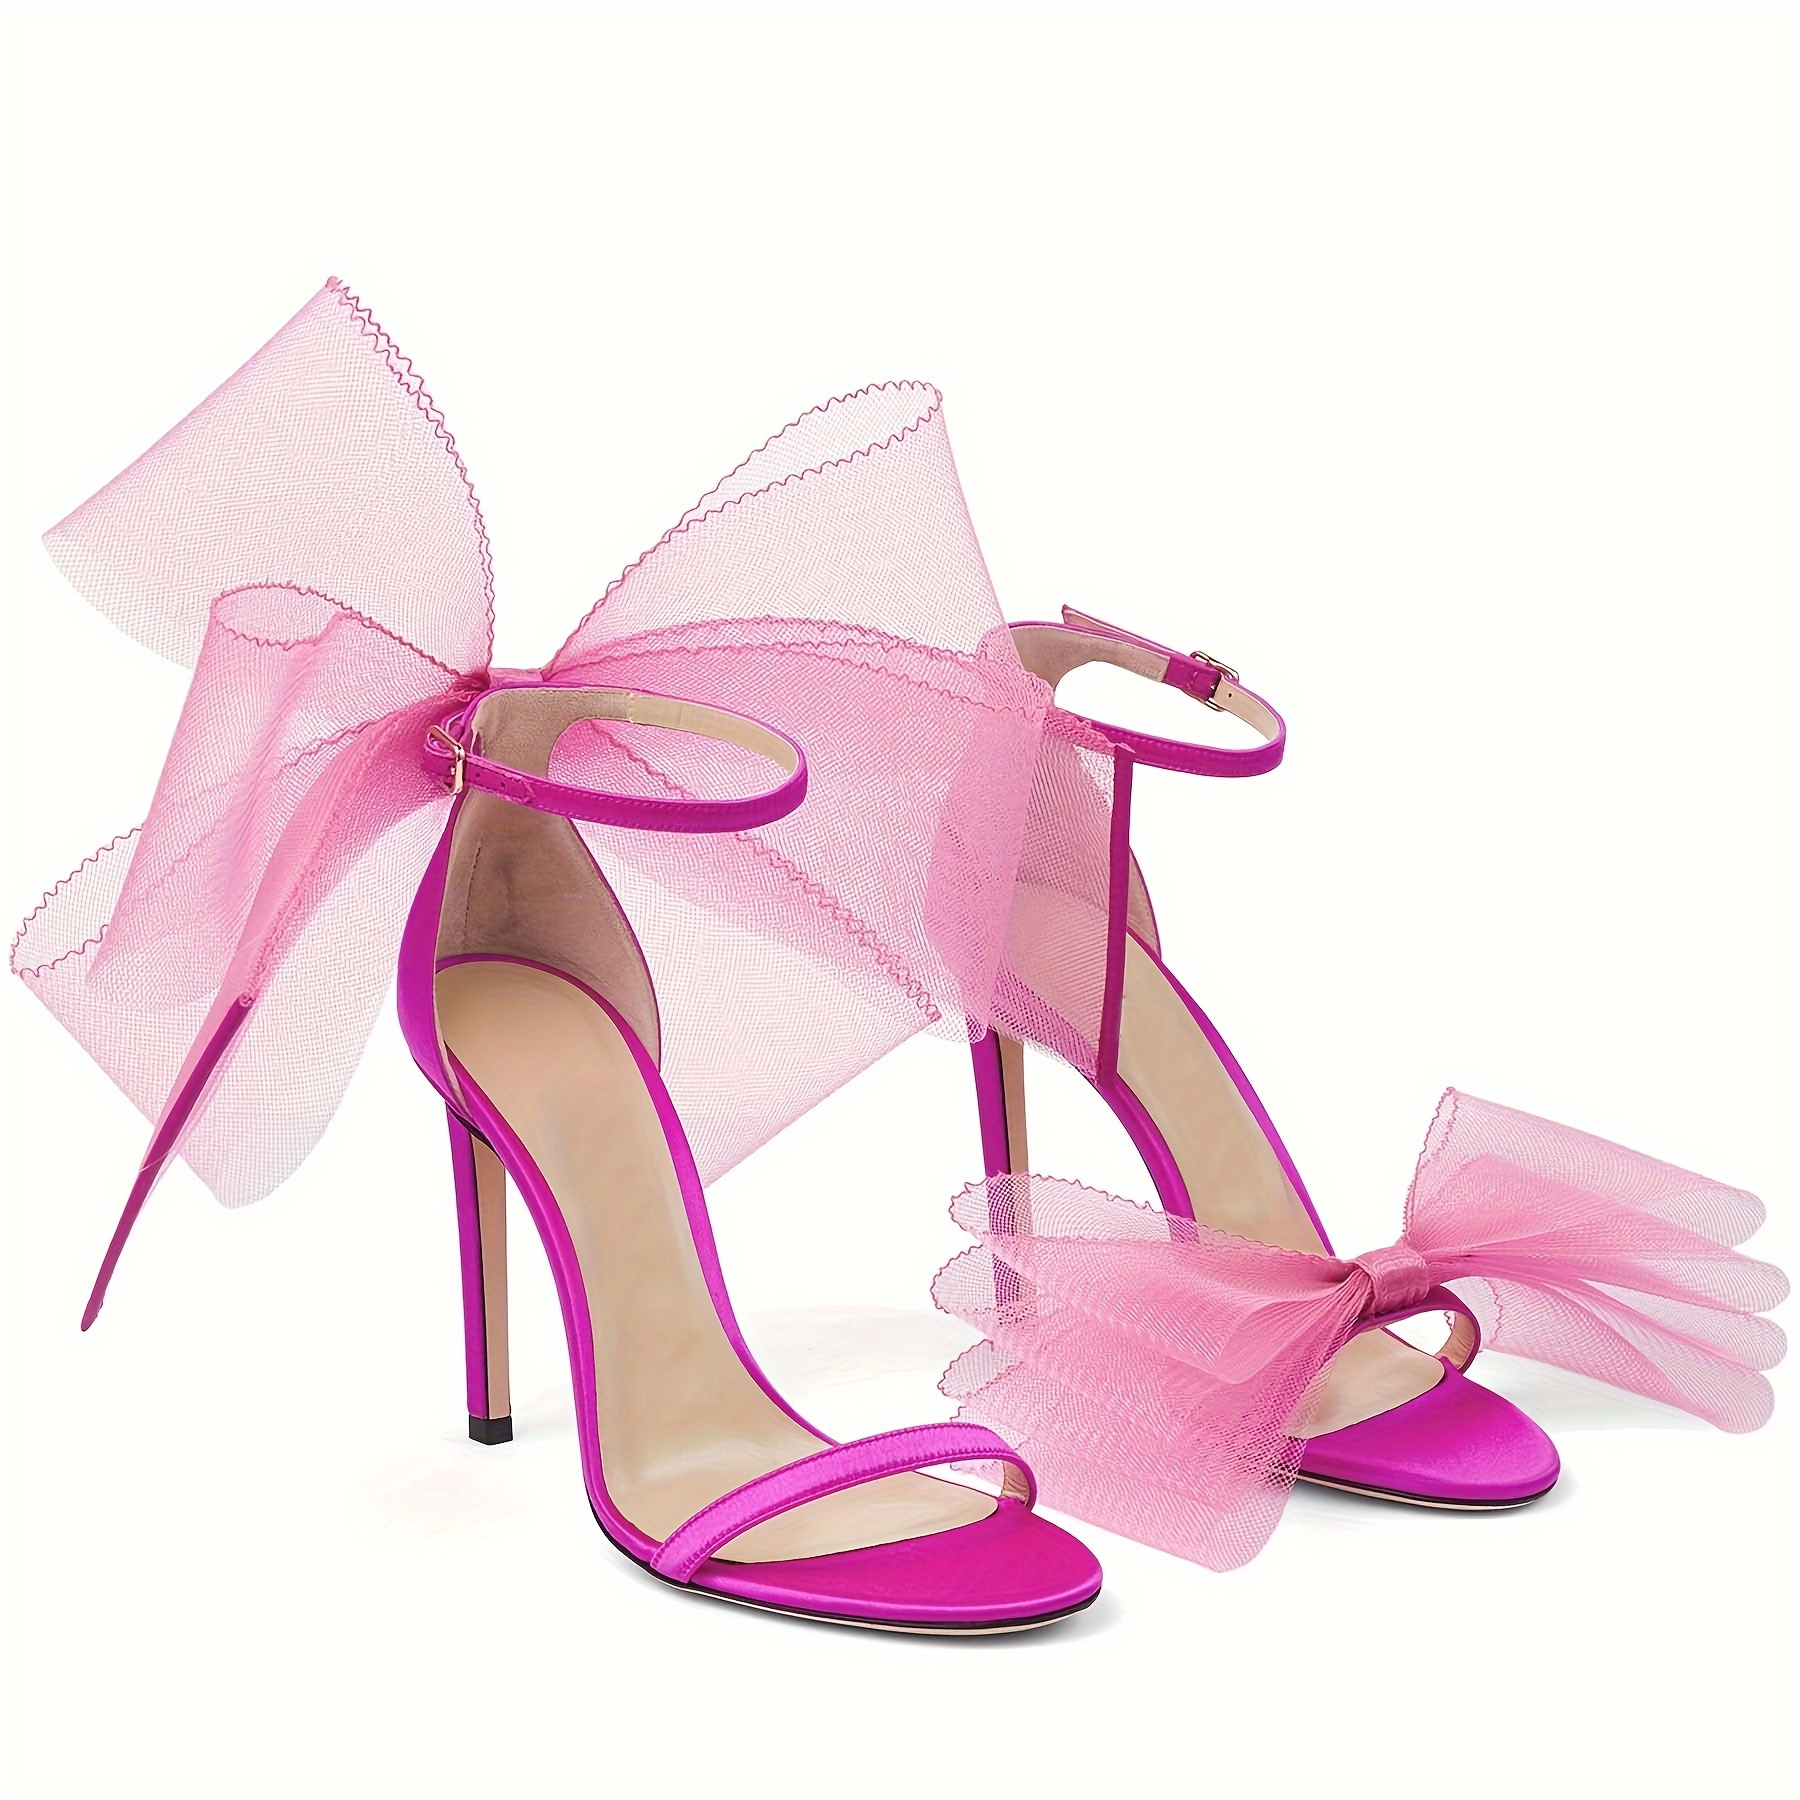 

Summer Shoes With Single Strap, High Heels, Butterfly Knot And Ankle Buckle For Women